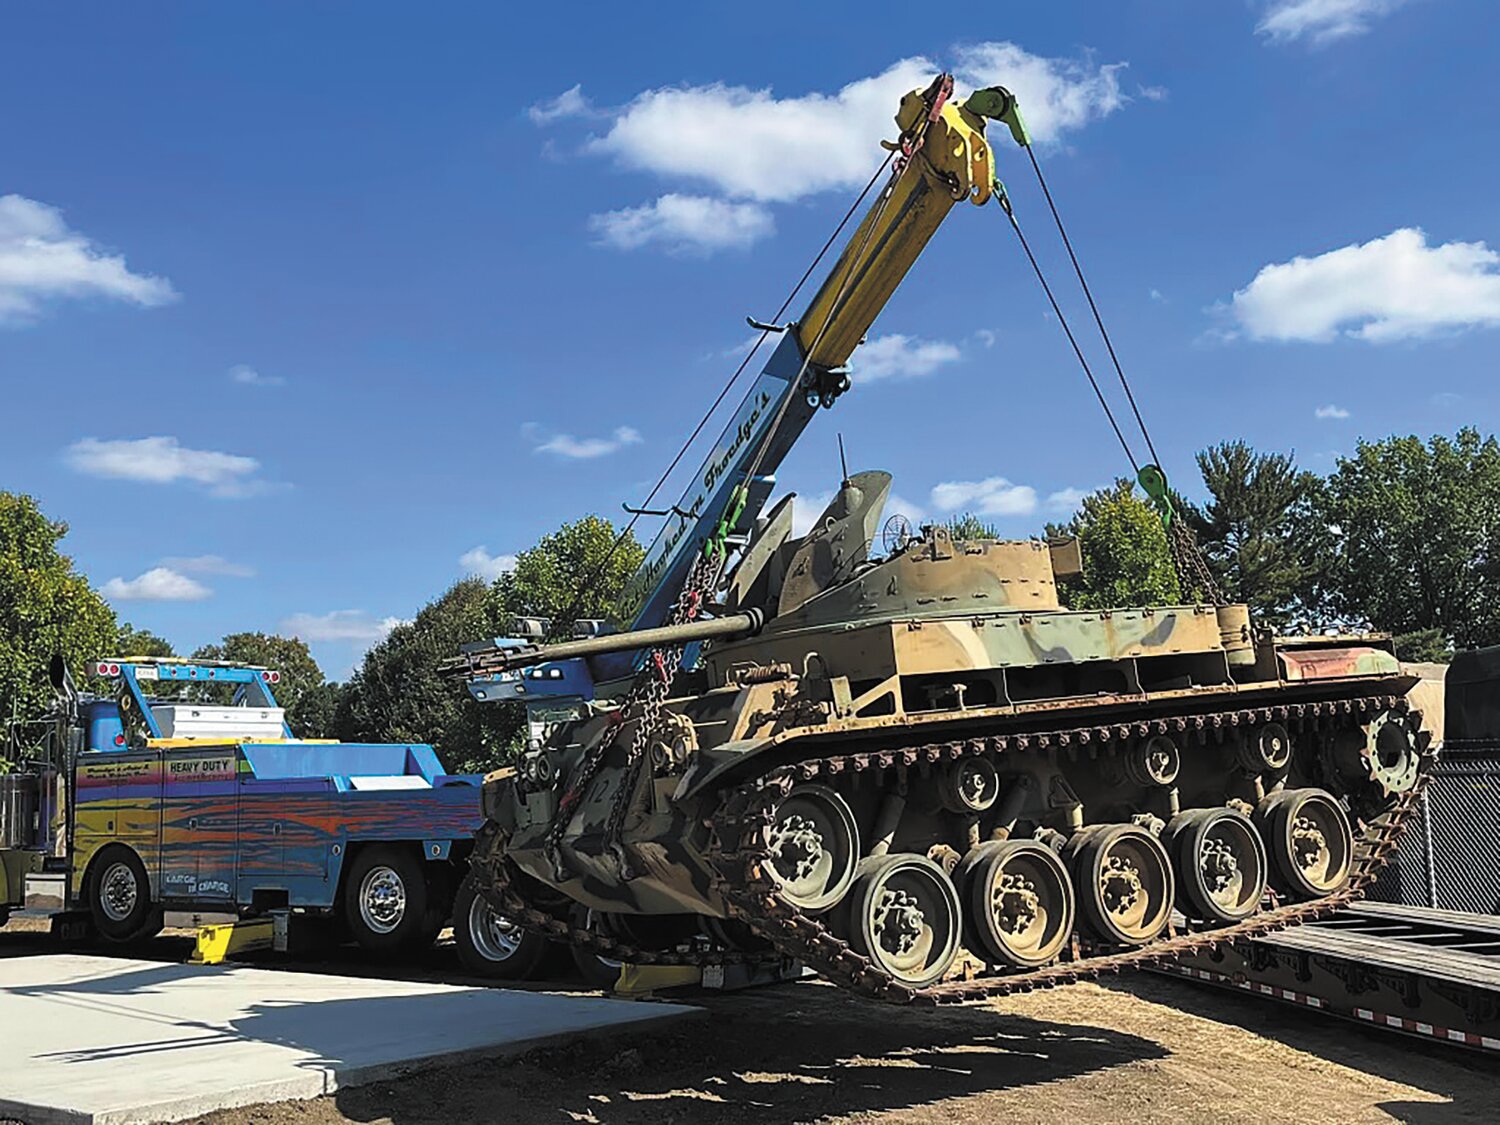 An M42 Duster is one of the latest additions to the Veterans Memorial Park near the Byron Cox Post 72 American Legion.